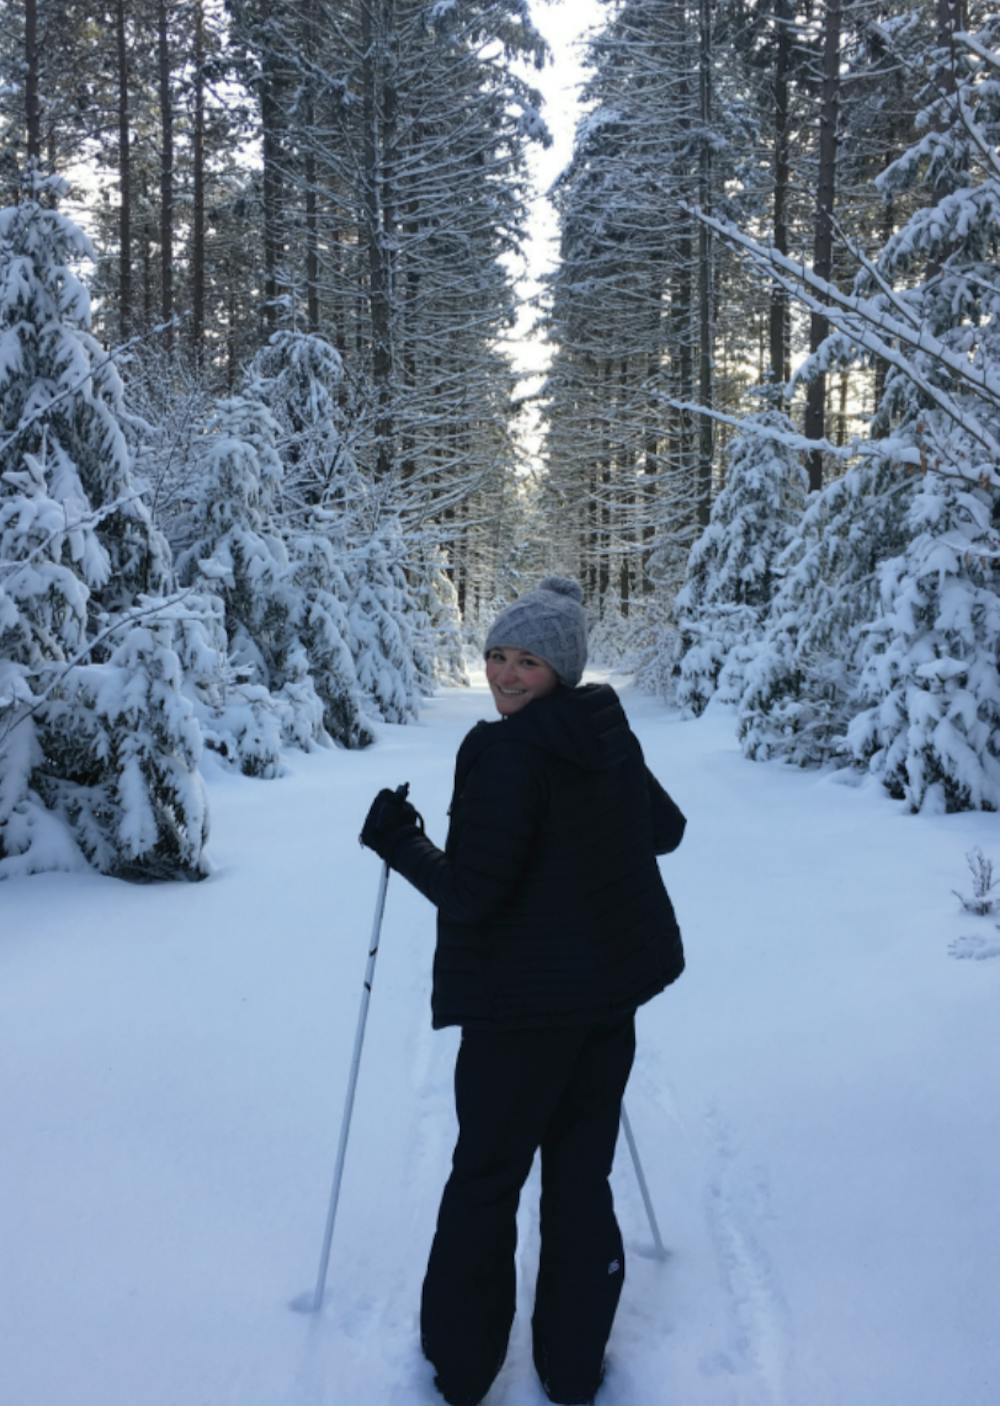 Mikaela Taylor ’15.5, who works in Special Collections, grew up in Houston,
Texas, but since moving to Vermont has picked up cross-country skiing among other winter activities.